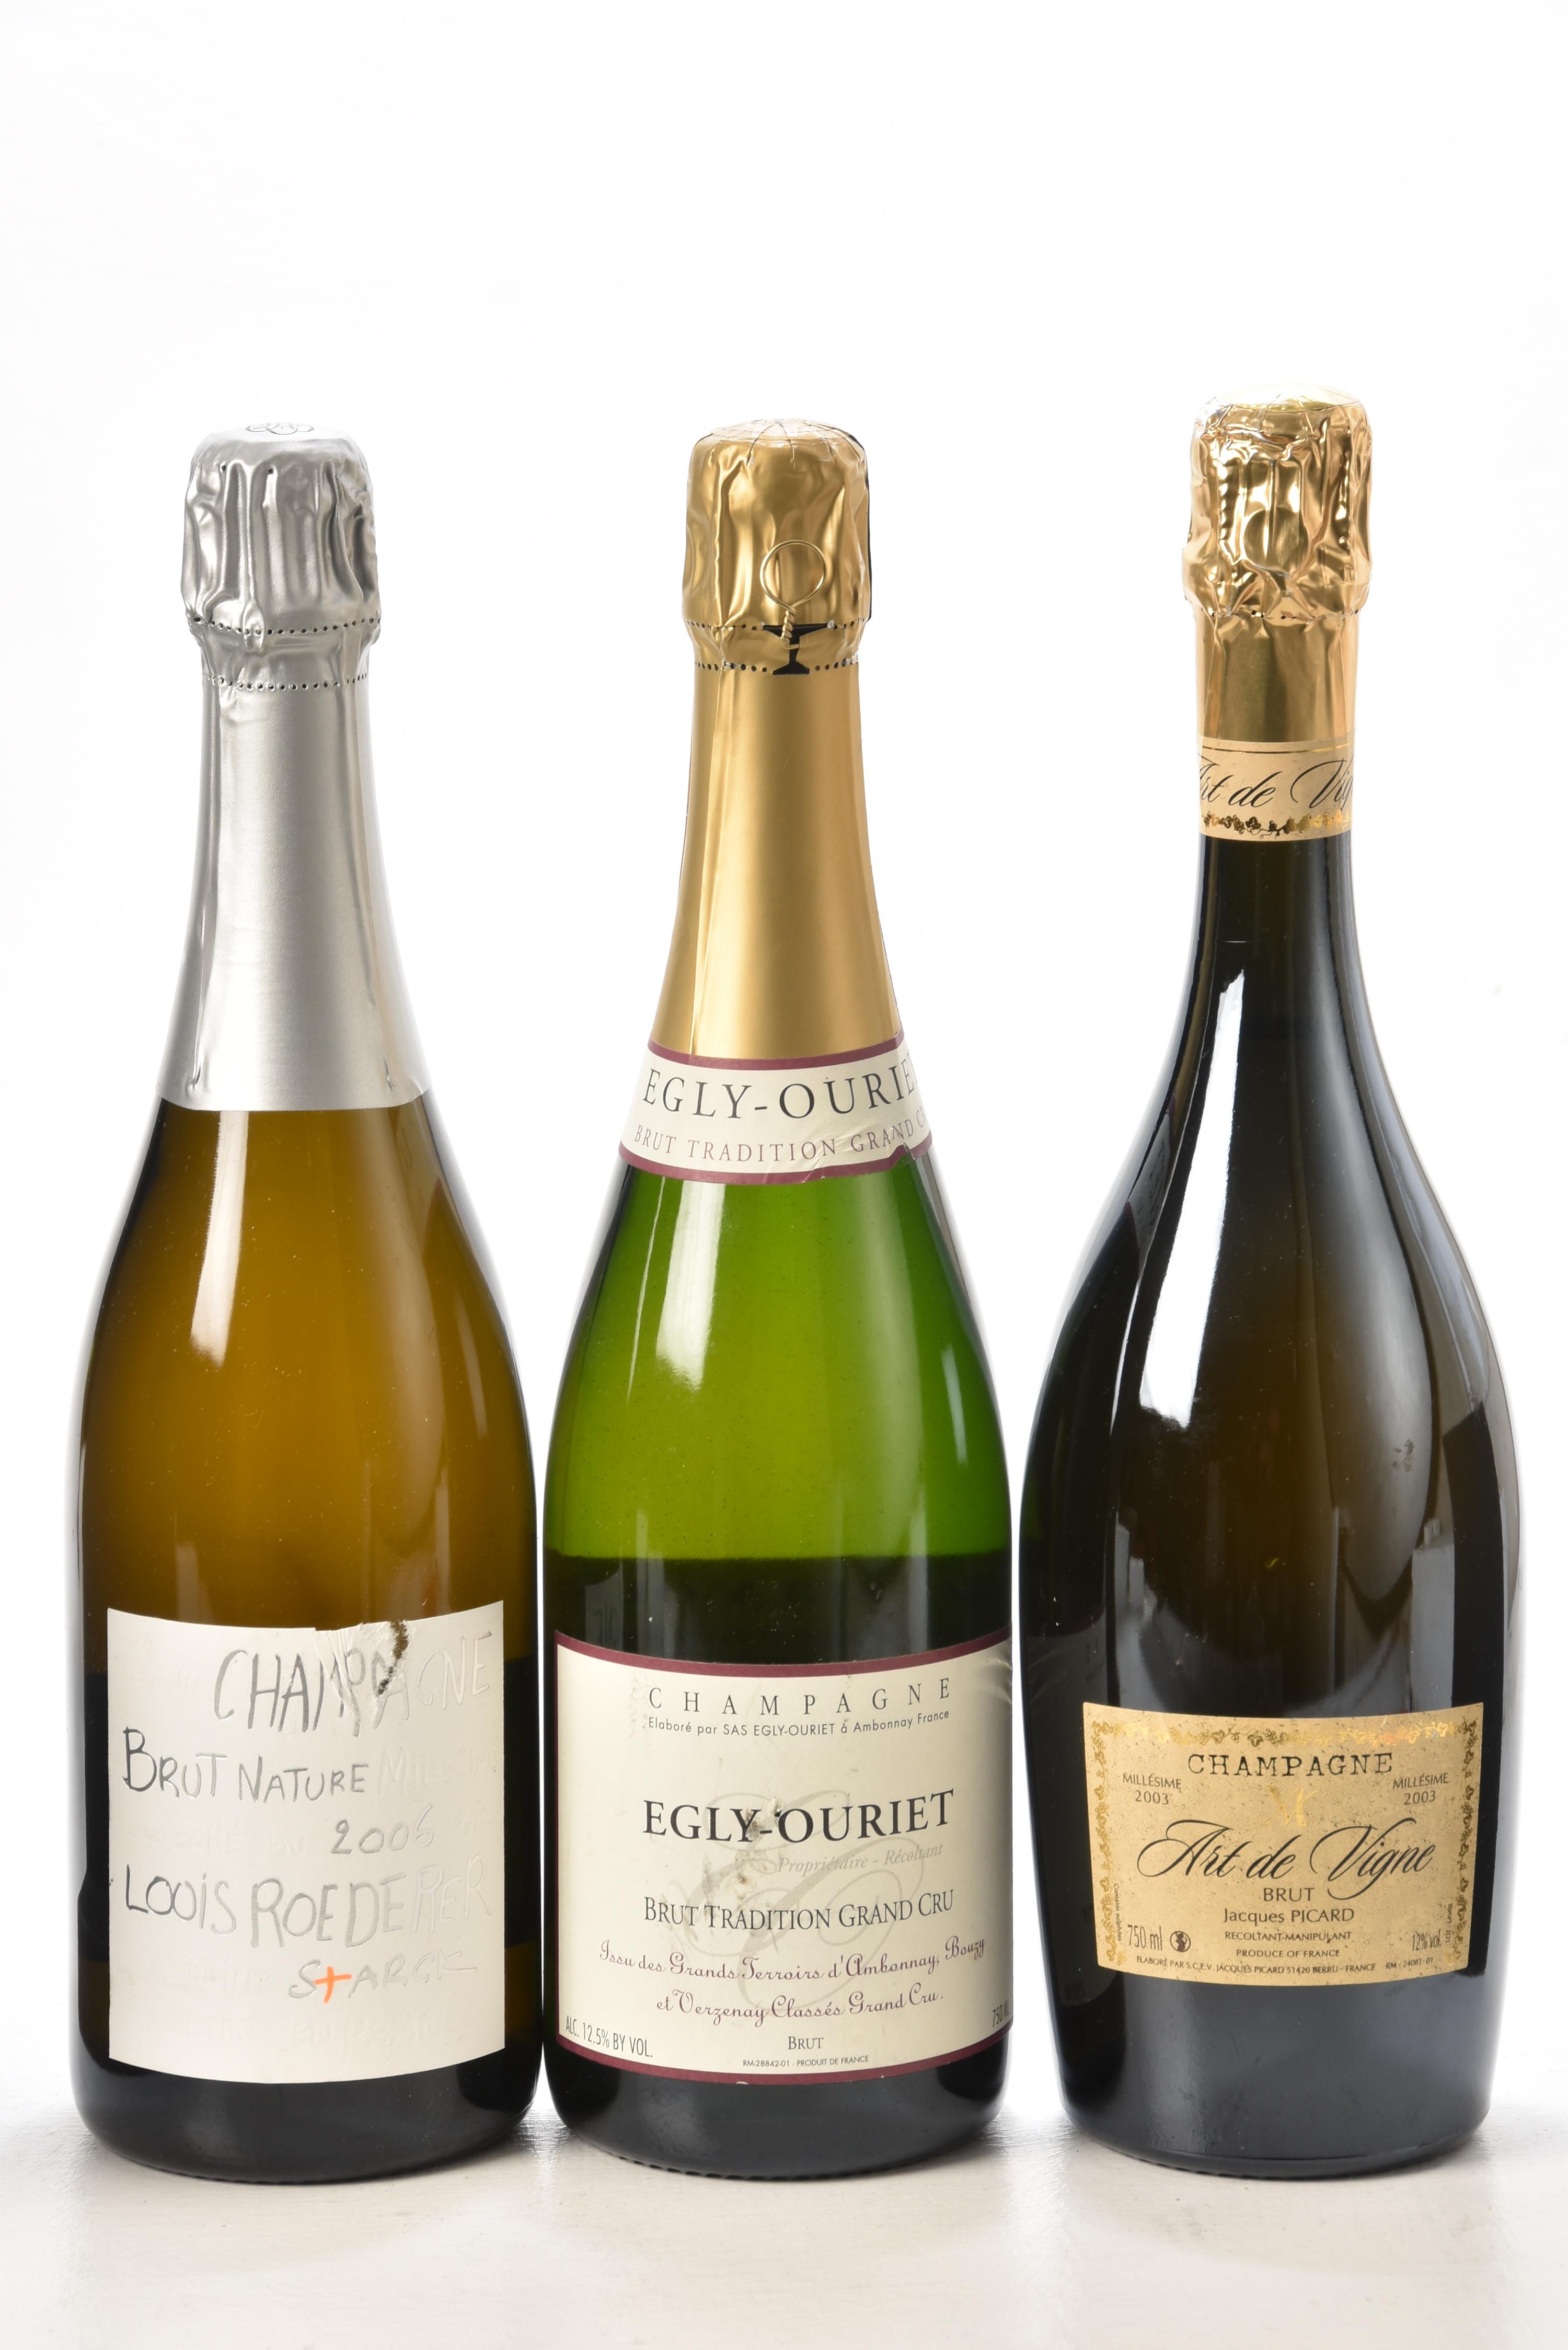 Champagne Egly Ouriet Brut Tradition GC Disgorged July 2014 1 bt Champagne Louis Roederer Brut Natur